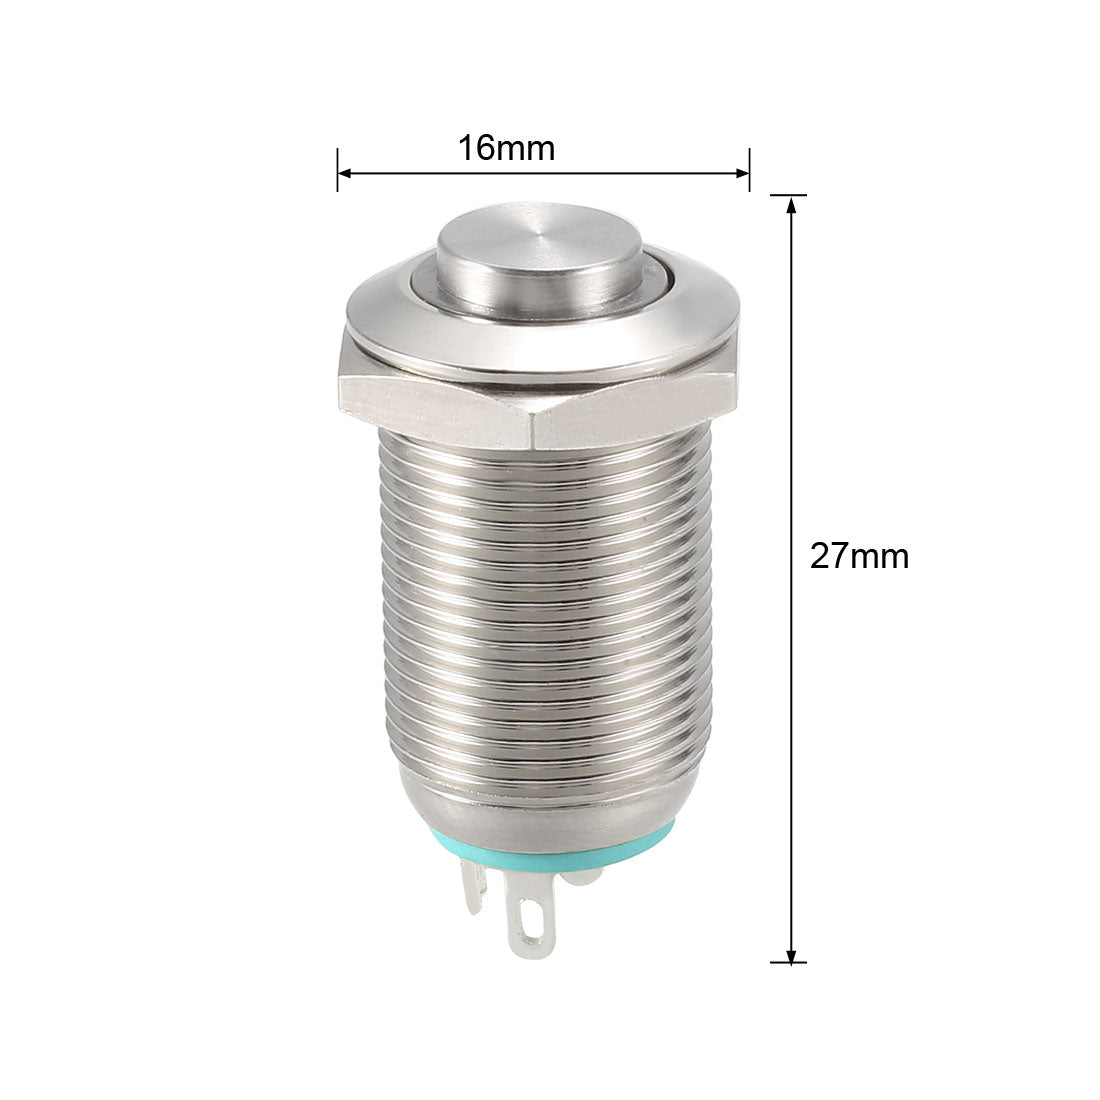 uxcell Uxcell Metal Push Button Switch High Head 12mm Mounting Dia 1NO 3-6V LED Light